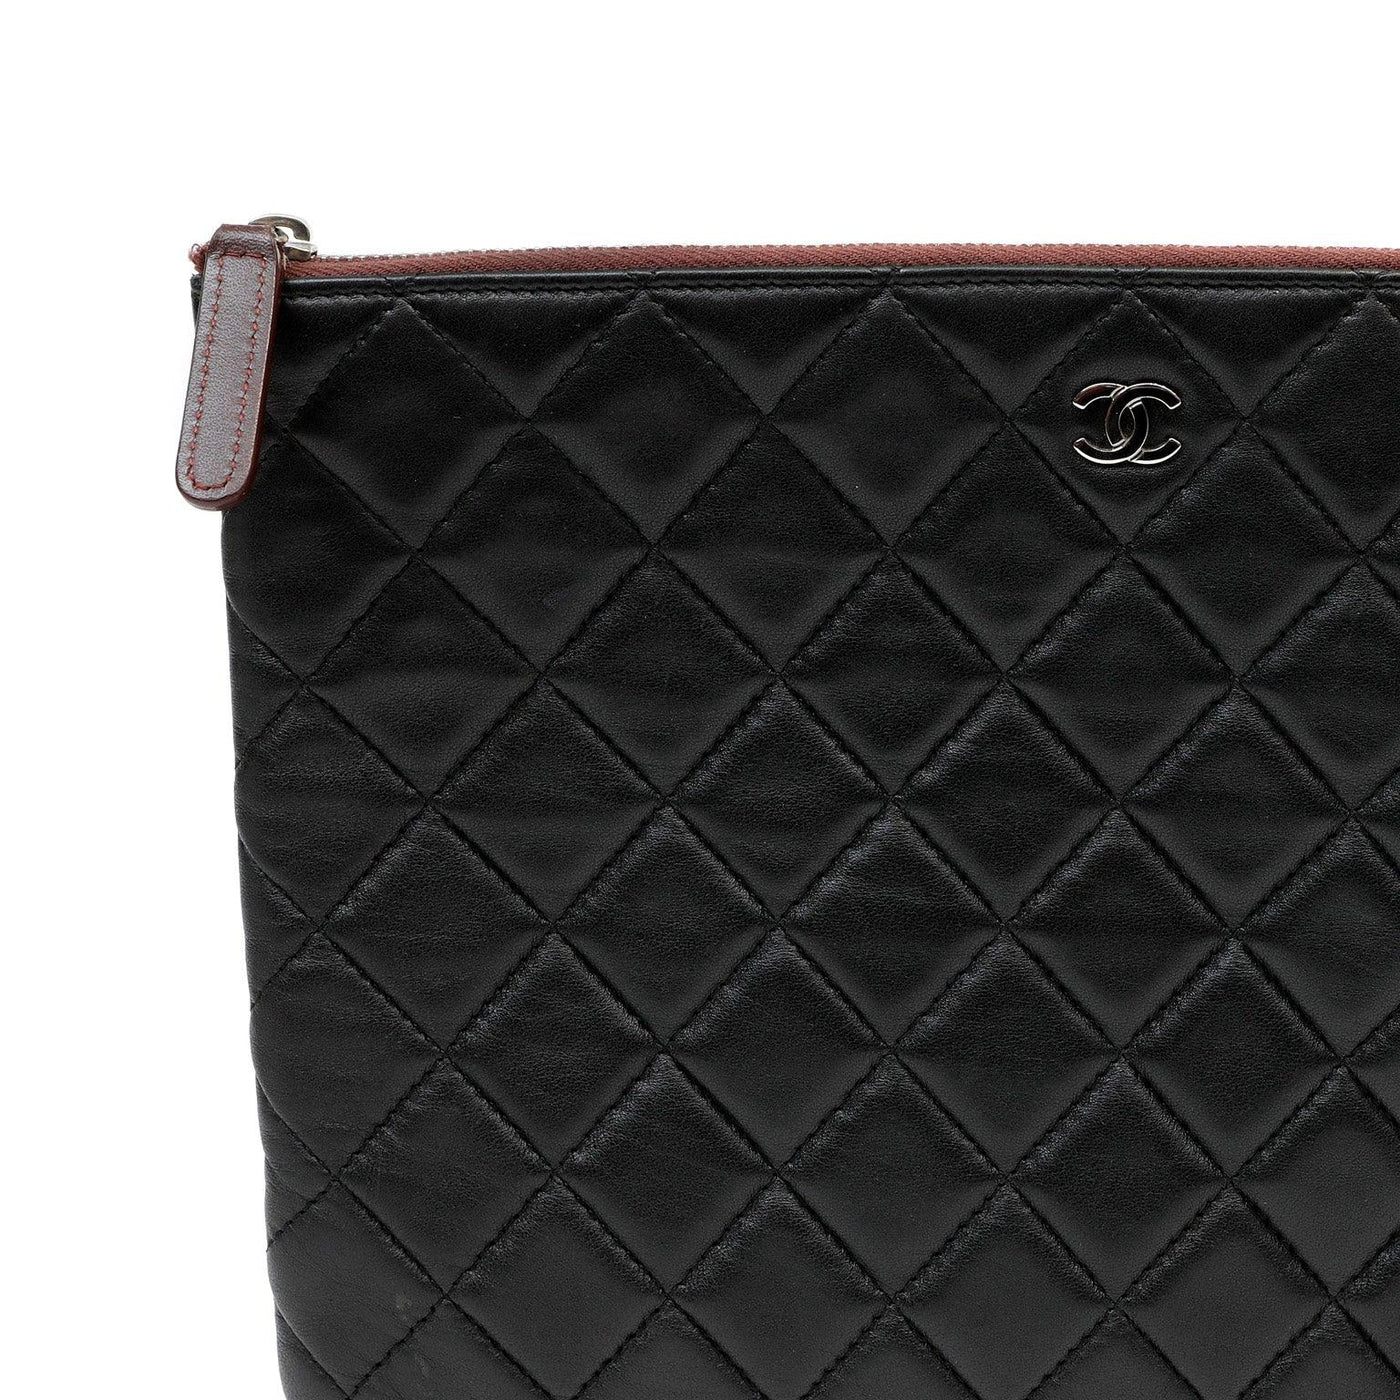 Chanel Small Black Quilted Lambskin Classic O-Case w/ Silver Hardware - Only Authentics